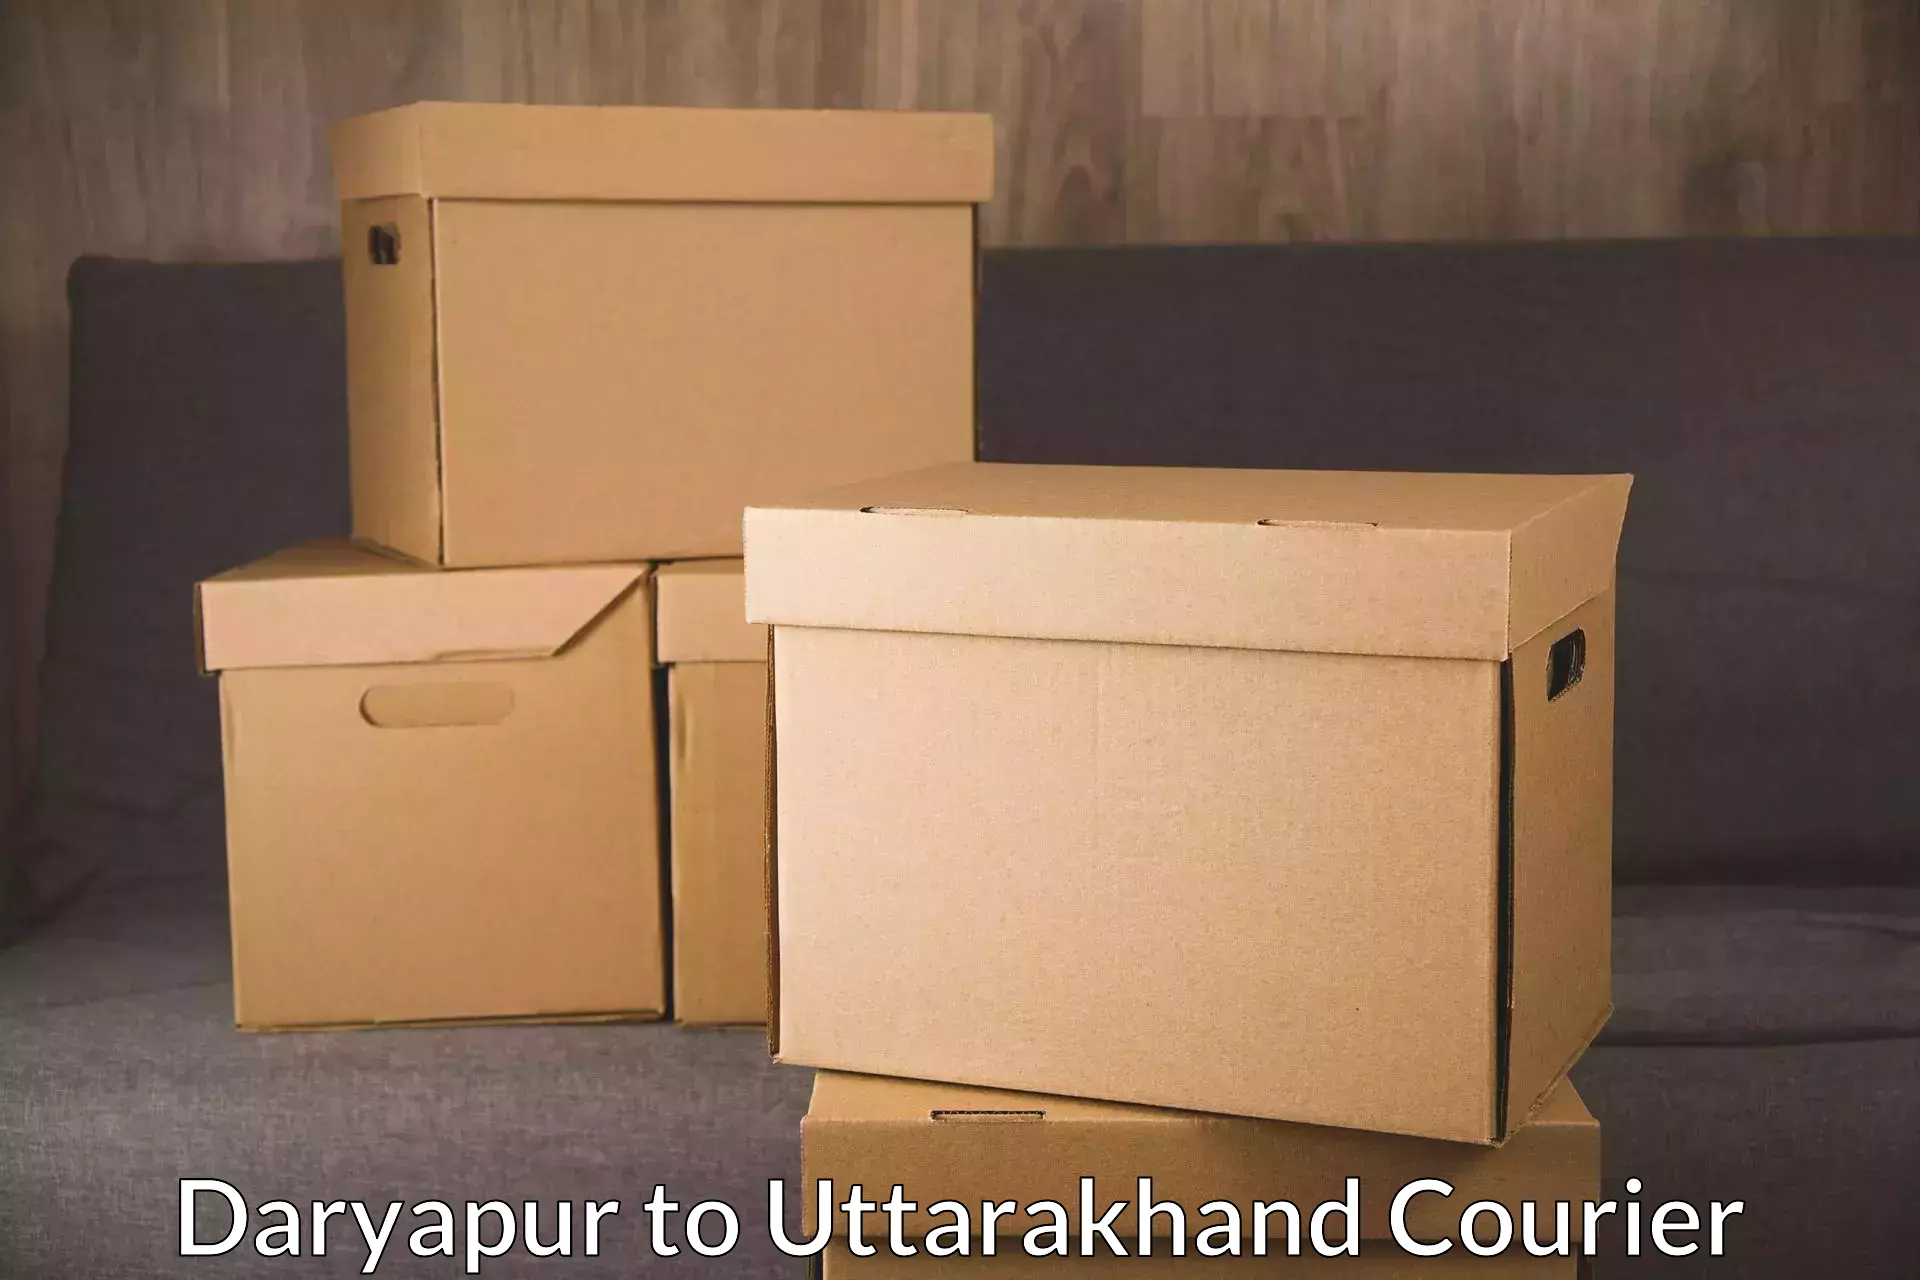 Global courier networks Daryapur to Rishikesh